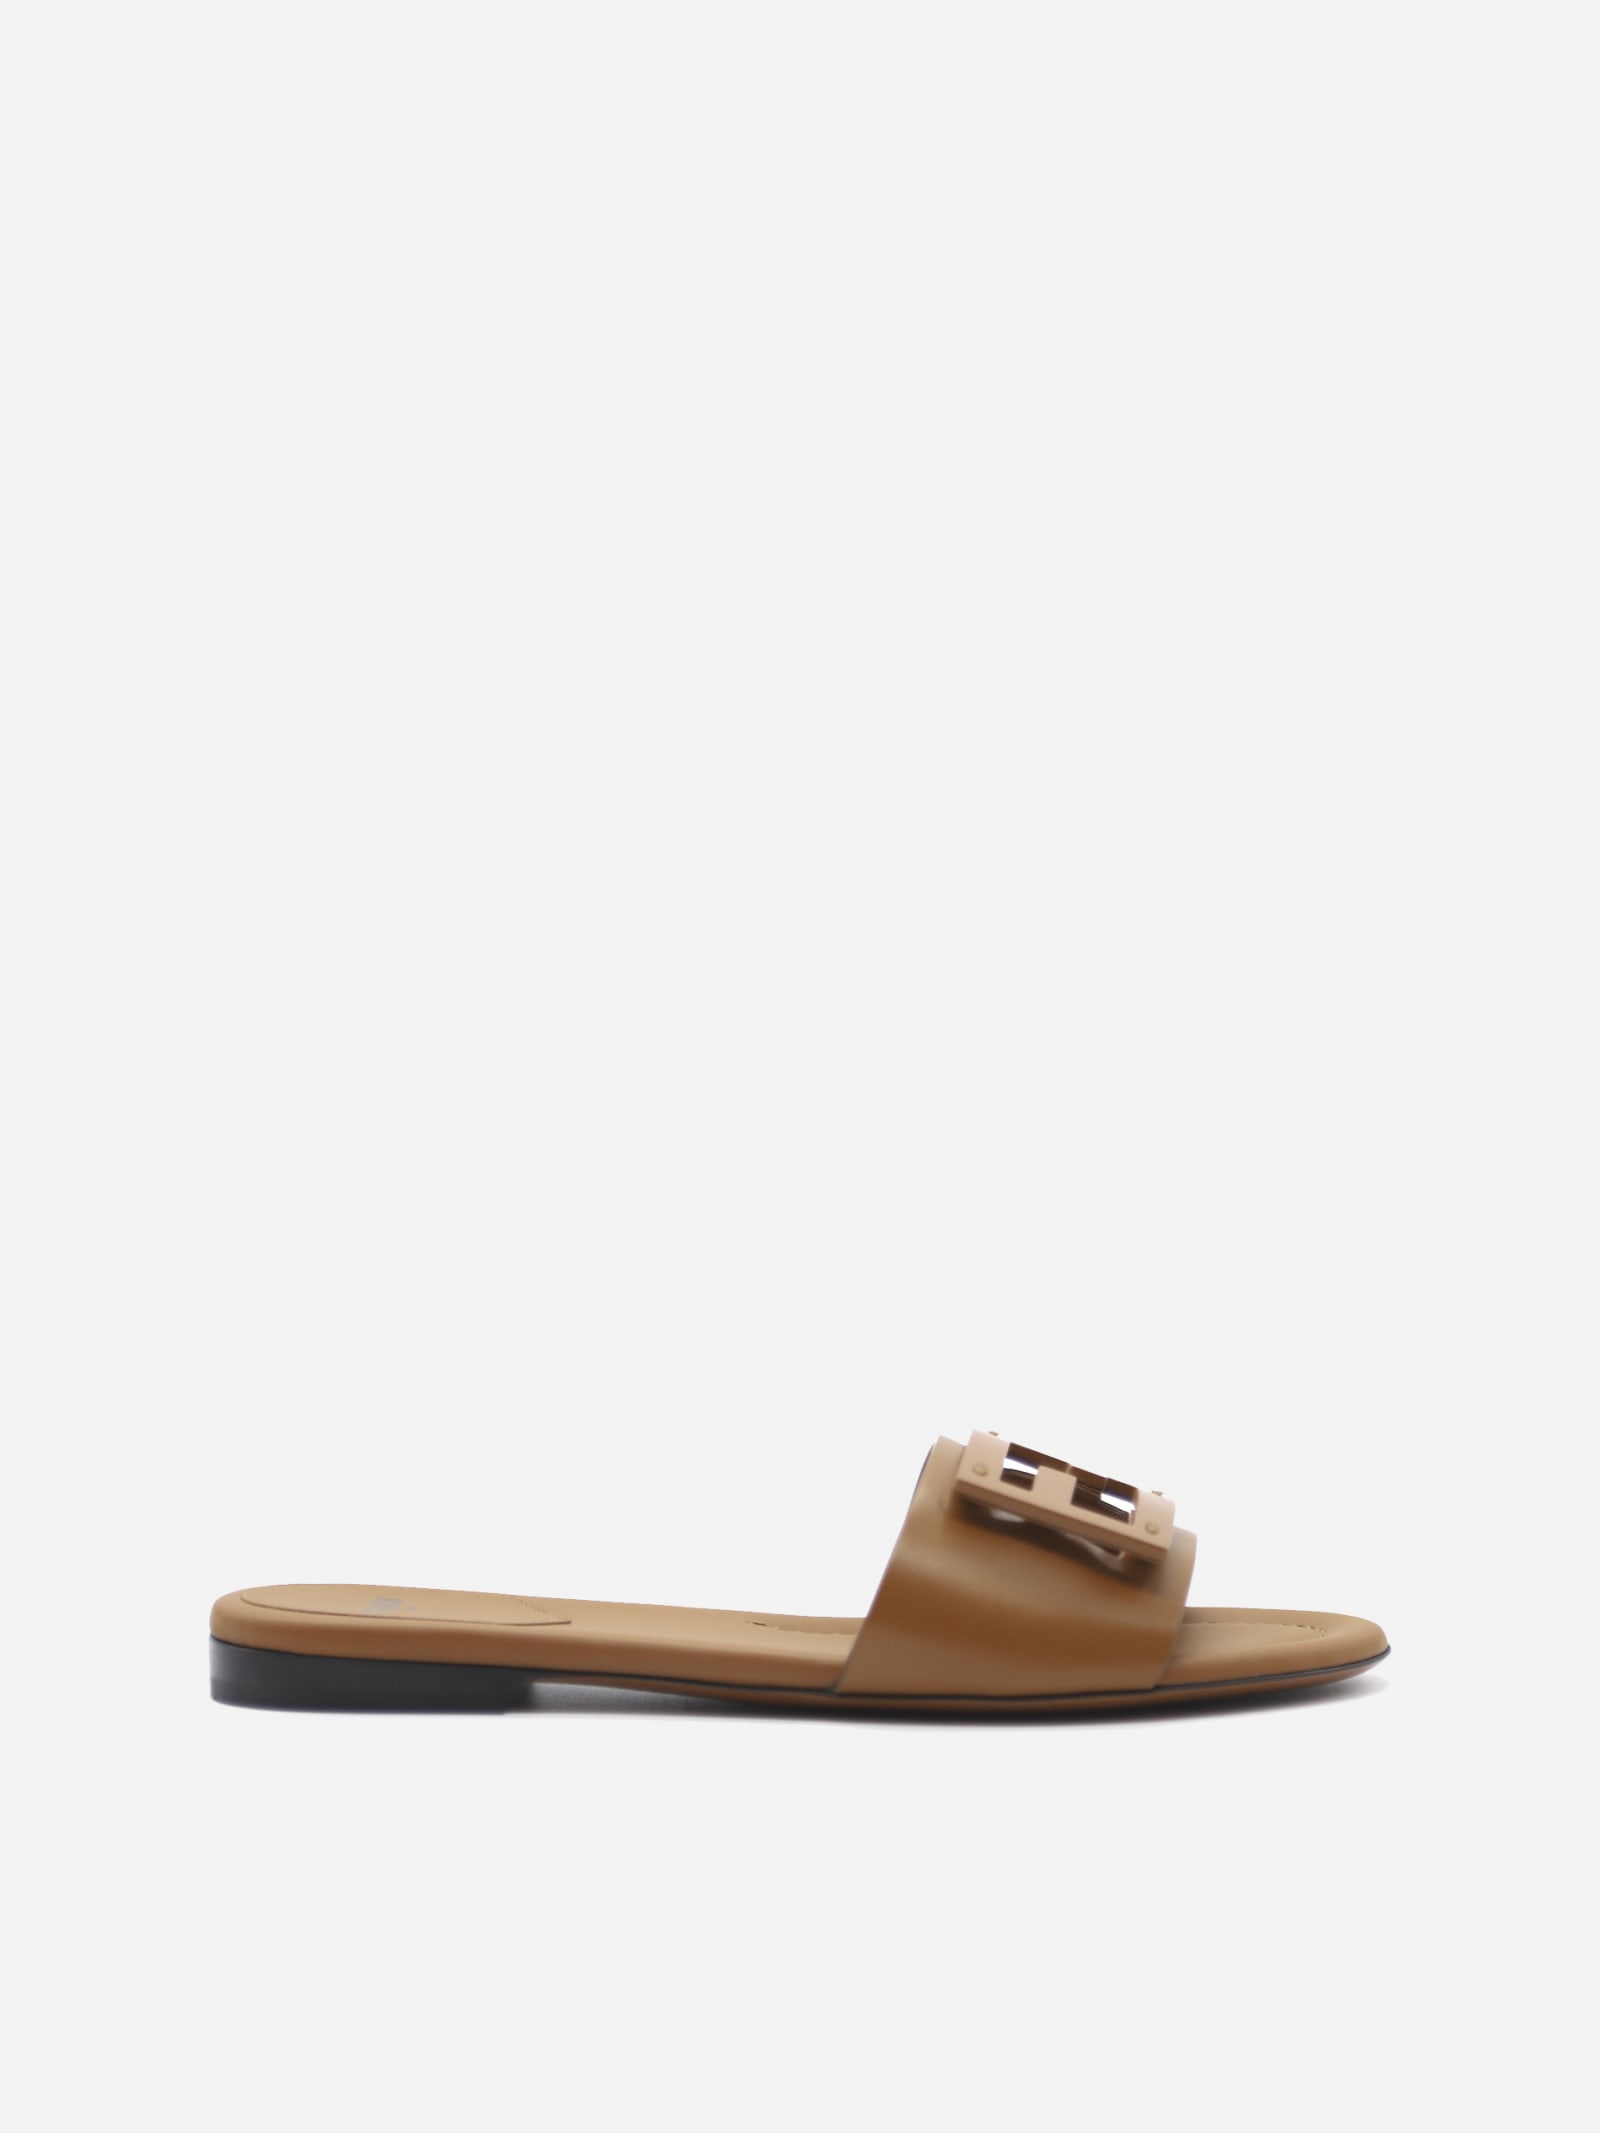 Buy Fendi Leather Slides Sandals With Ff Baguette Motif online, shop Fendi shoes with free shipping